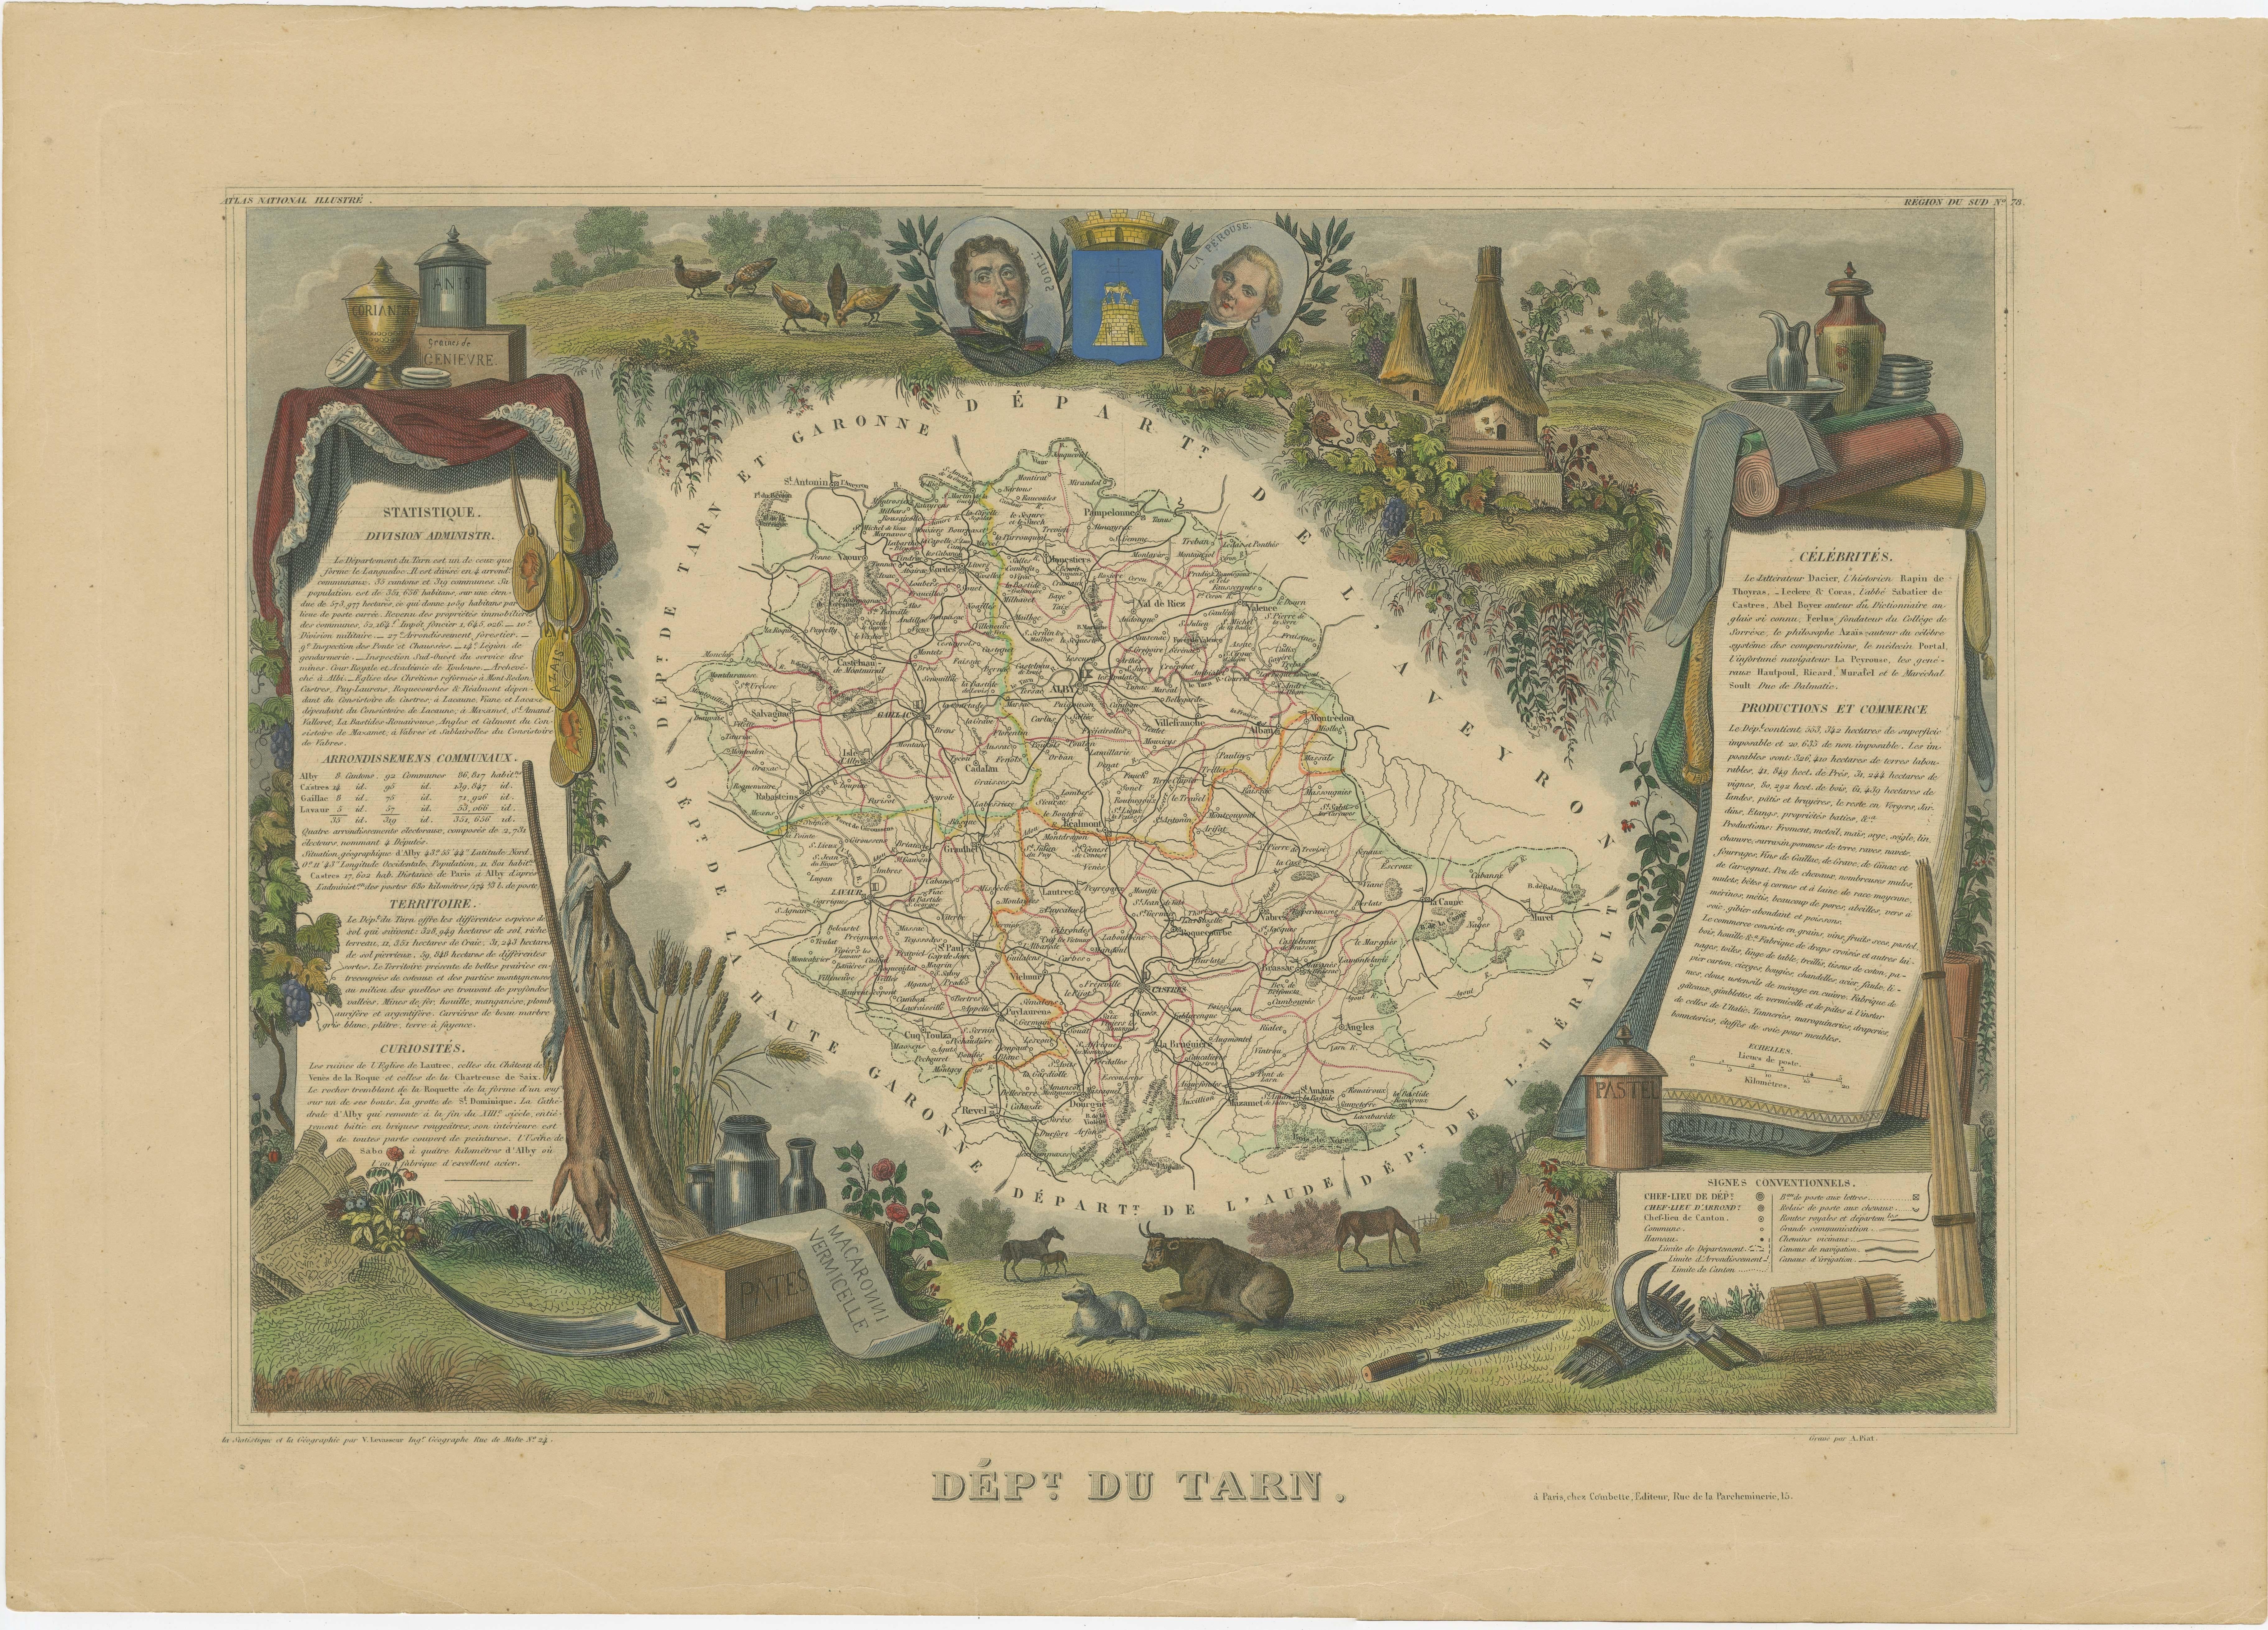 Antique map titled 'Dépt. du Tarn'. Map of the French department of Tarn, France. This area produces a variety of traditional wines, including Cahors, Mauzac, Loin de l’Oeil and Ondenc for the white varieties and Braucol, Duras and Prunelart for the